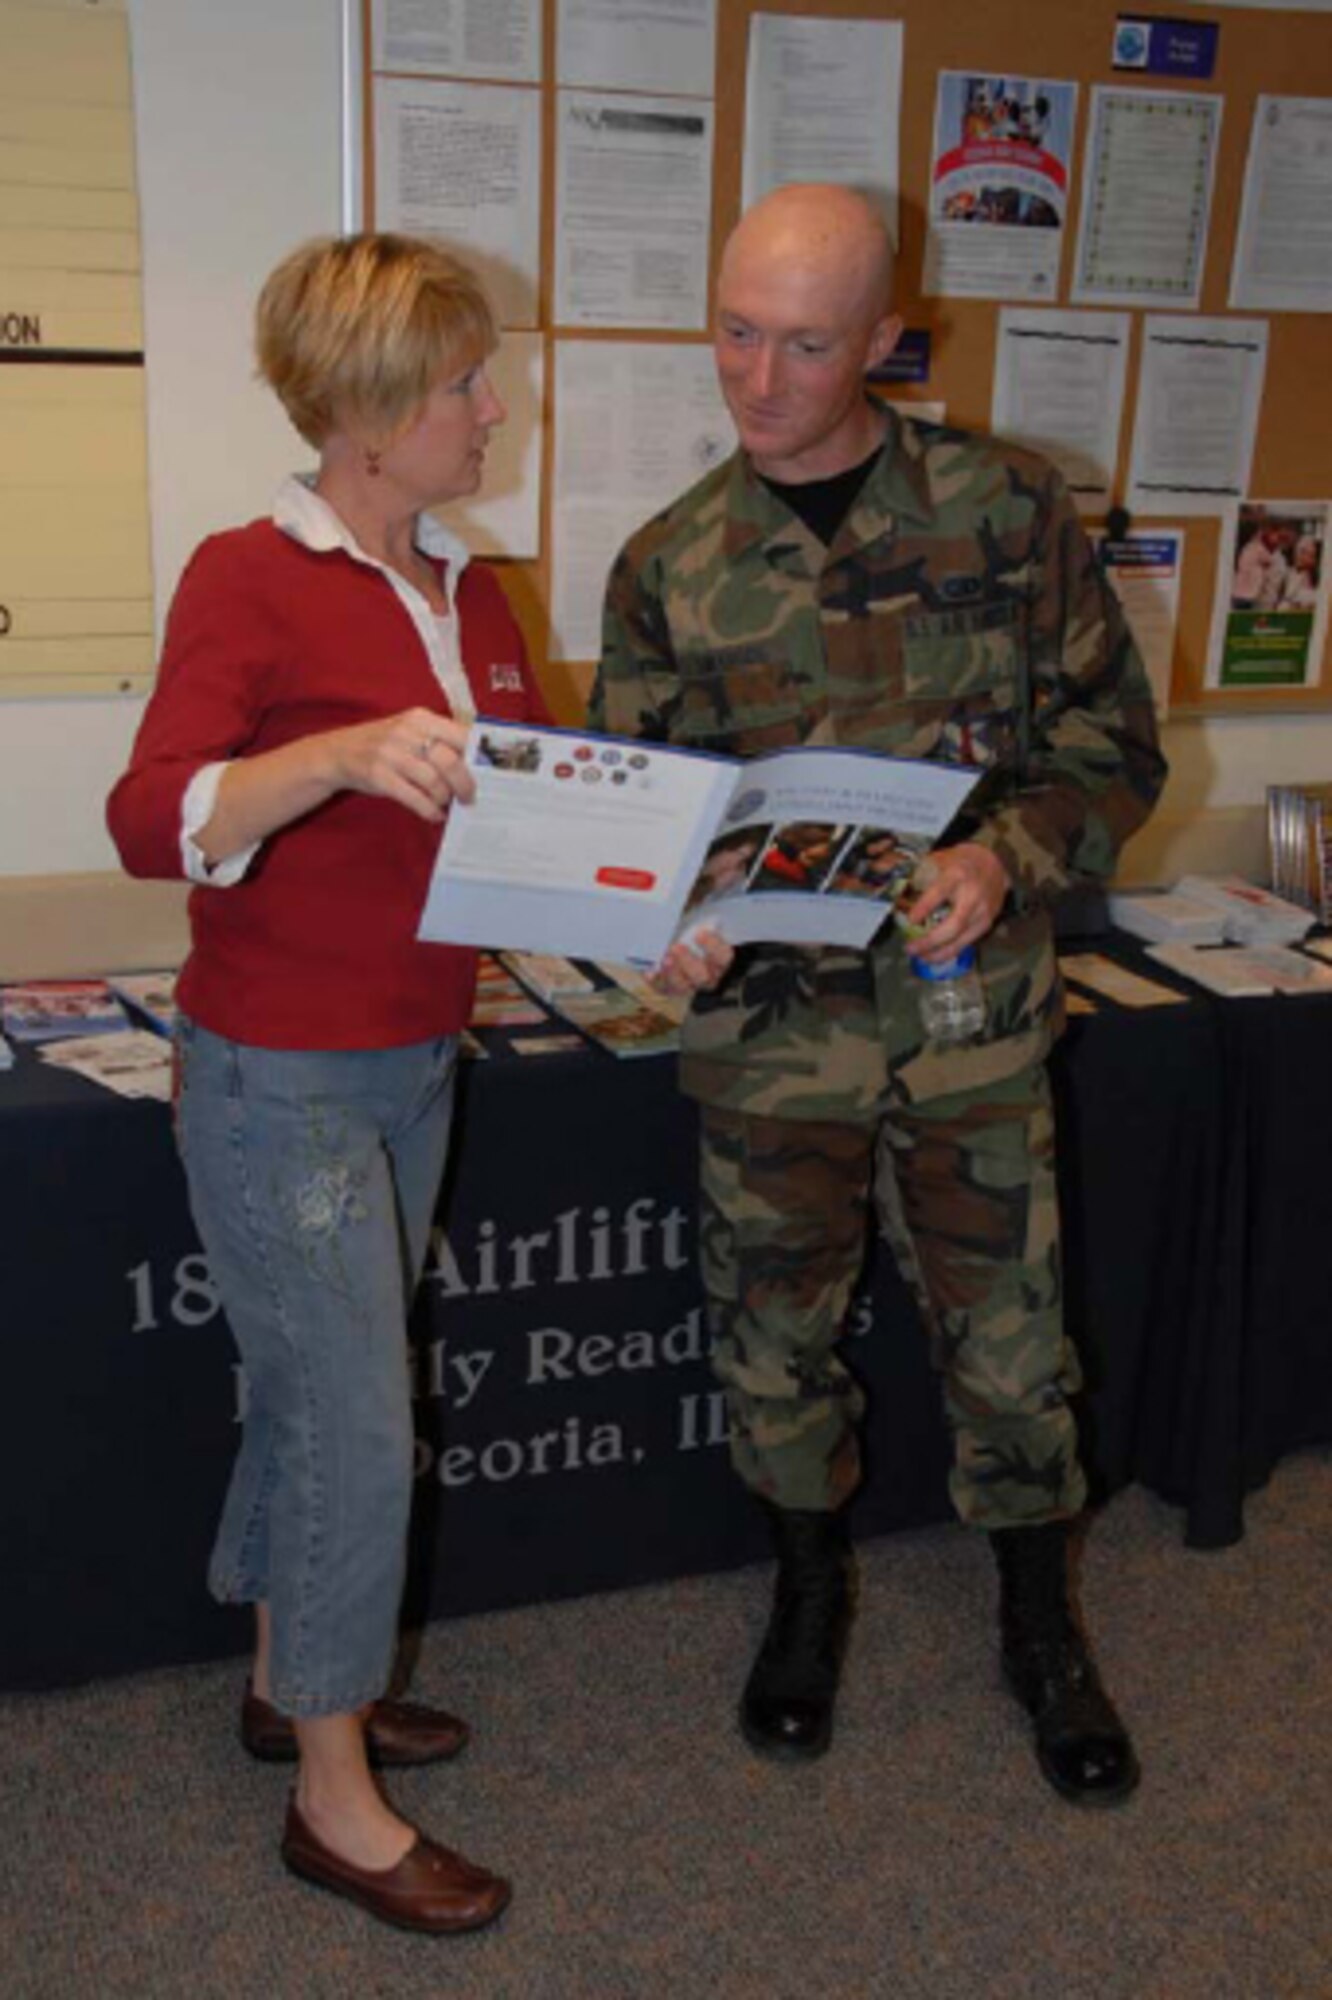 Susan Webb, President of the 182nd Airlift Wing Family Readiness Group, discusses some resources available to military members and their families to Senior Airman Scott Swanson, from the Communications Flight. Photo by Tech. Sgt. Shane Hill